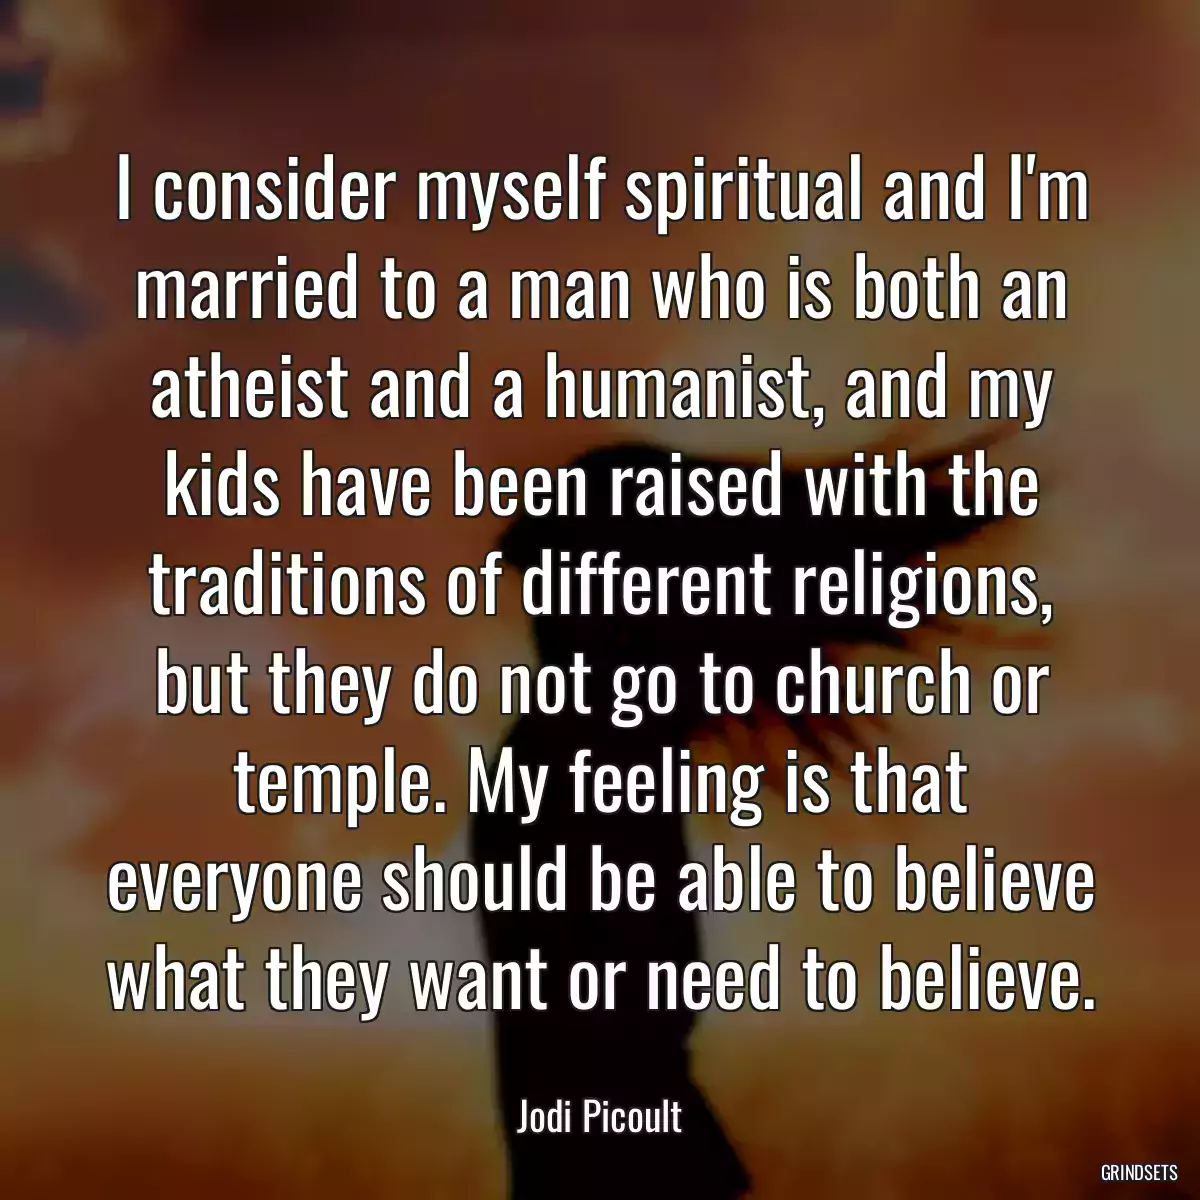 I consider myself spiritual and I\'m married to a man who is both an atheist and a humanist, and my kids have been raised with the traditions of different religions, but they do not go to church or temple. My feeling is that everyone should be able to believe what they want or need to believe.